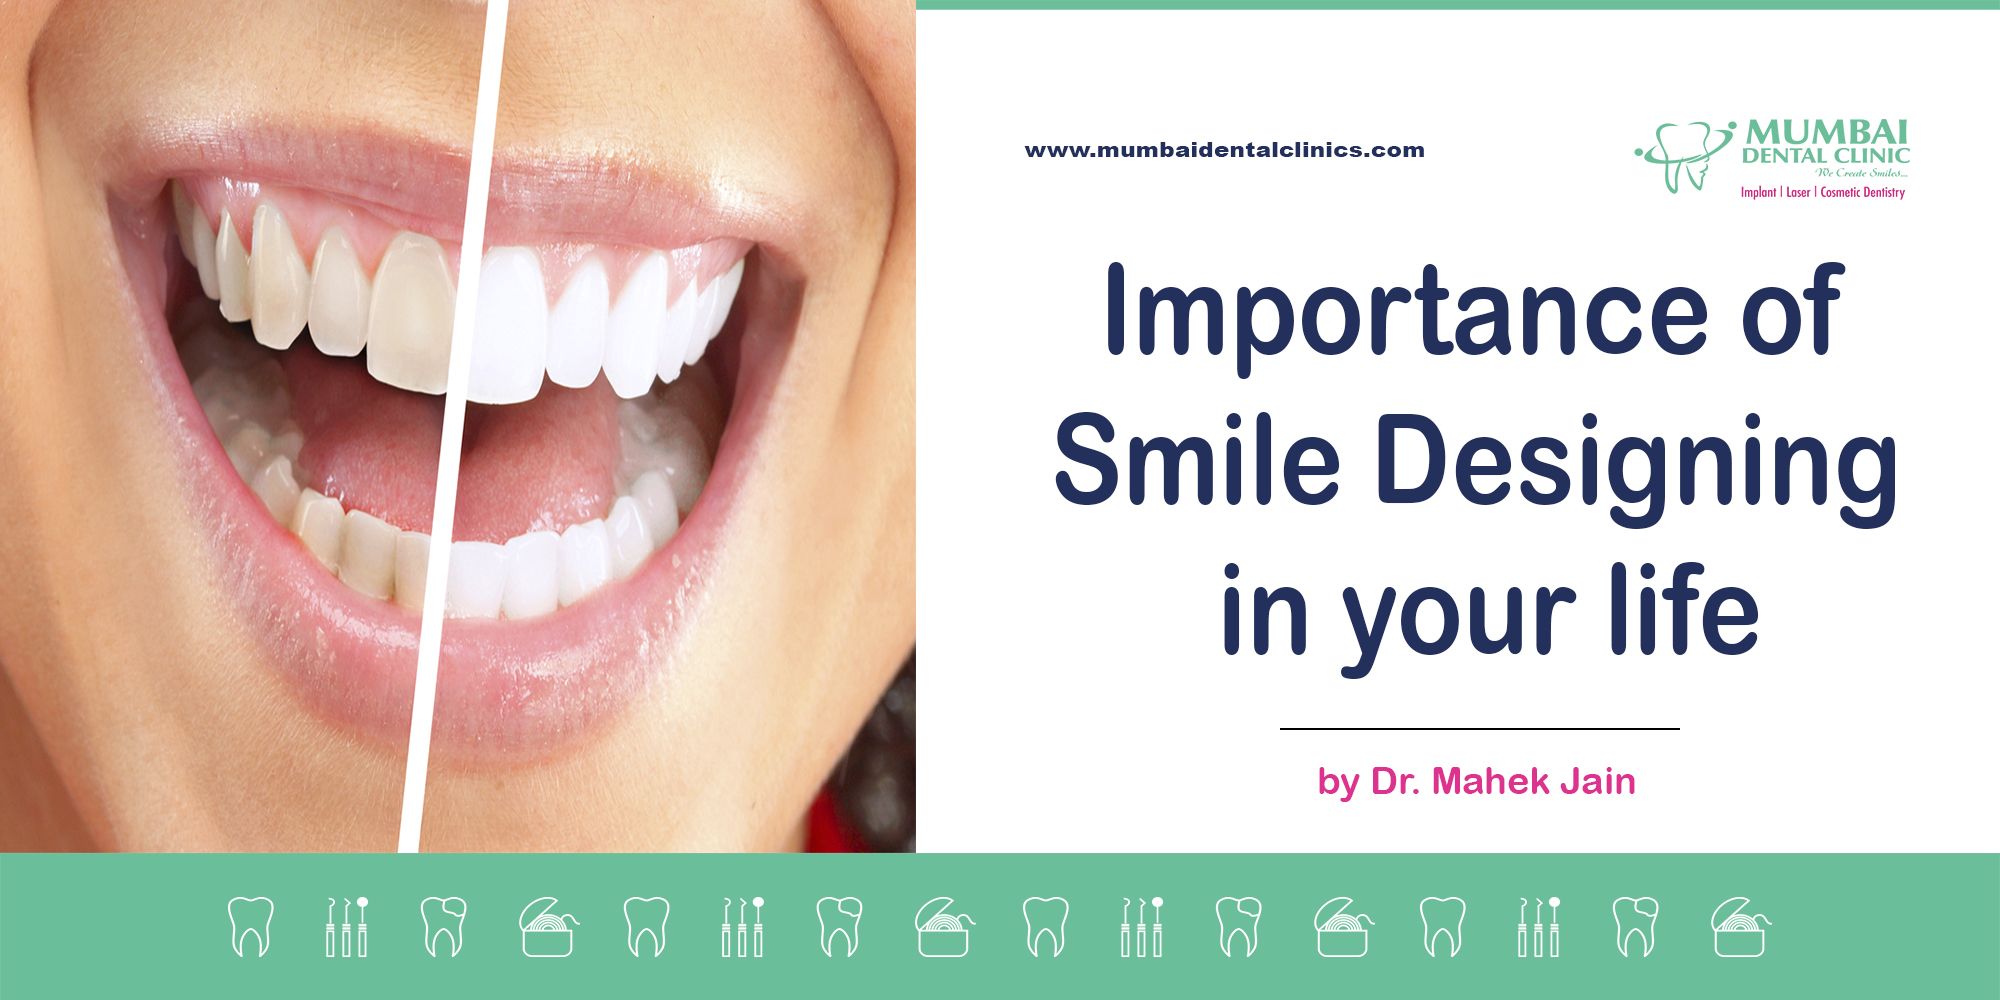 Importance of smile designing in your life, best dentist in udaipur,smile designing treatment in udaipur,Braces specialist in Udaipur,Braces doctor in Udaipur